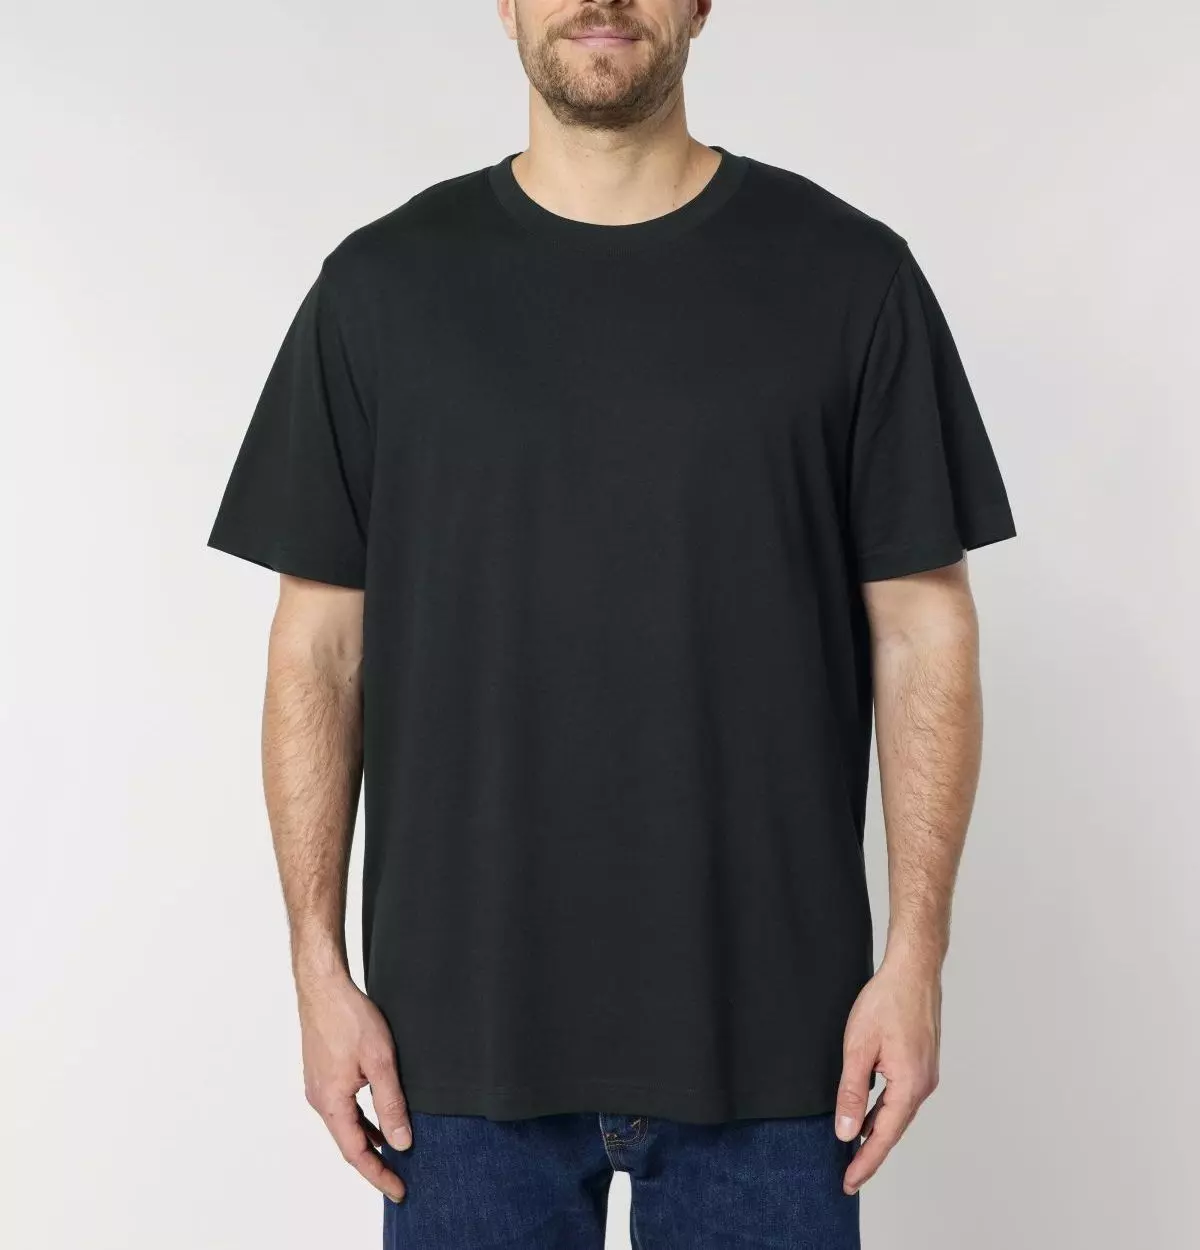 Loose-Fit T-Shirt Modell: Spades